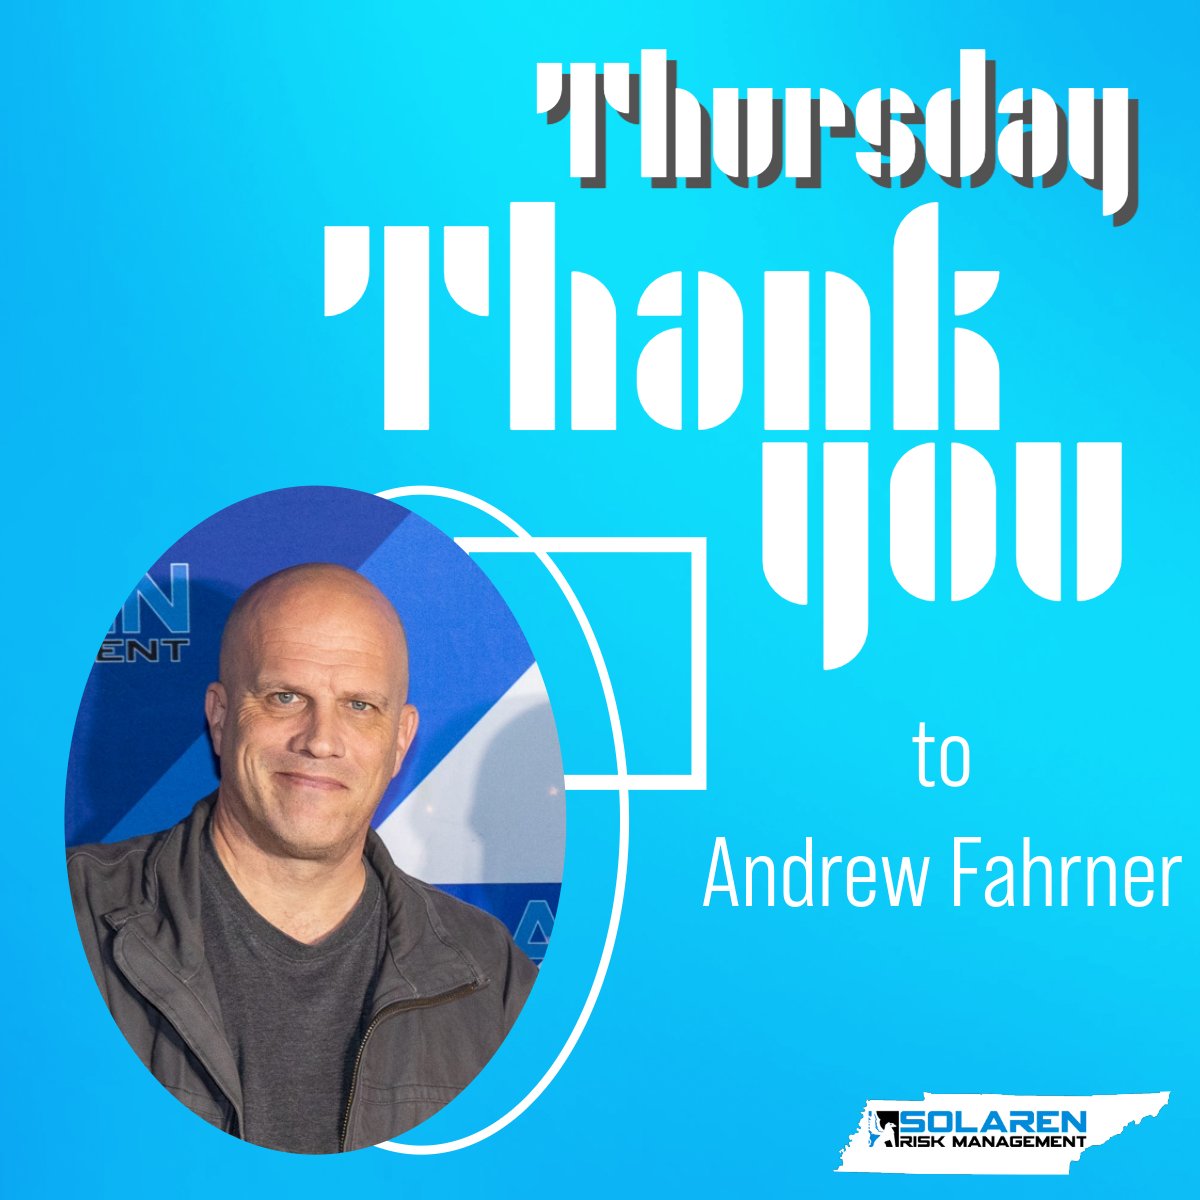 Welcome back to another #thursdaythankyou with Solaren! Today we are highlighting the extraordinary efforts and commitment to the values of our company of Andrew Fahrner, one of our Off-Duty Law Enforcement Officers.